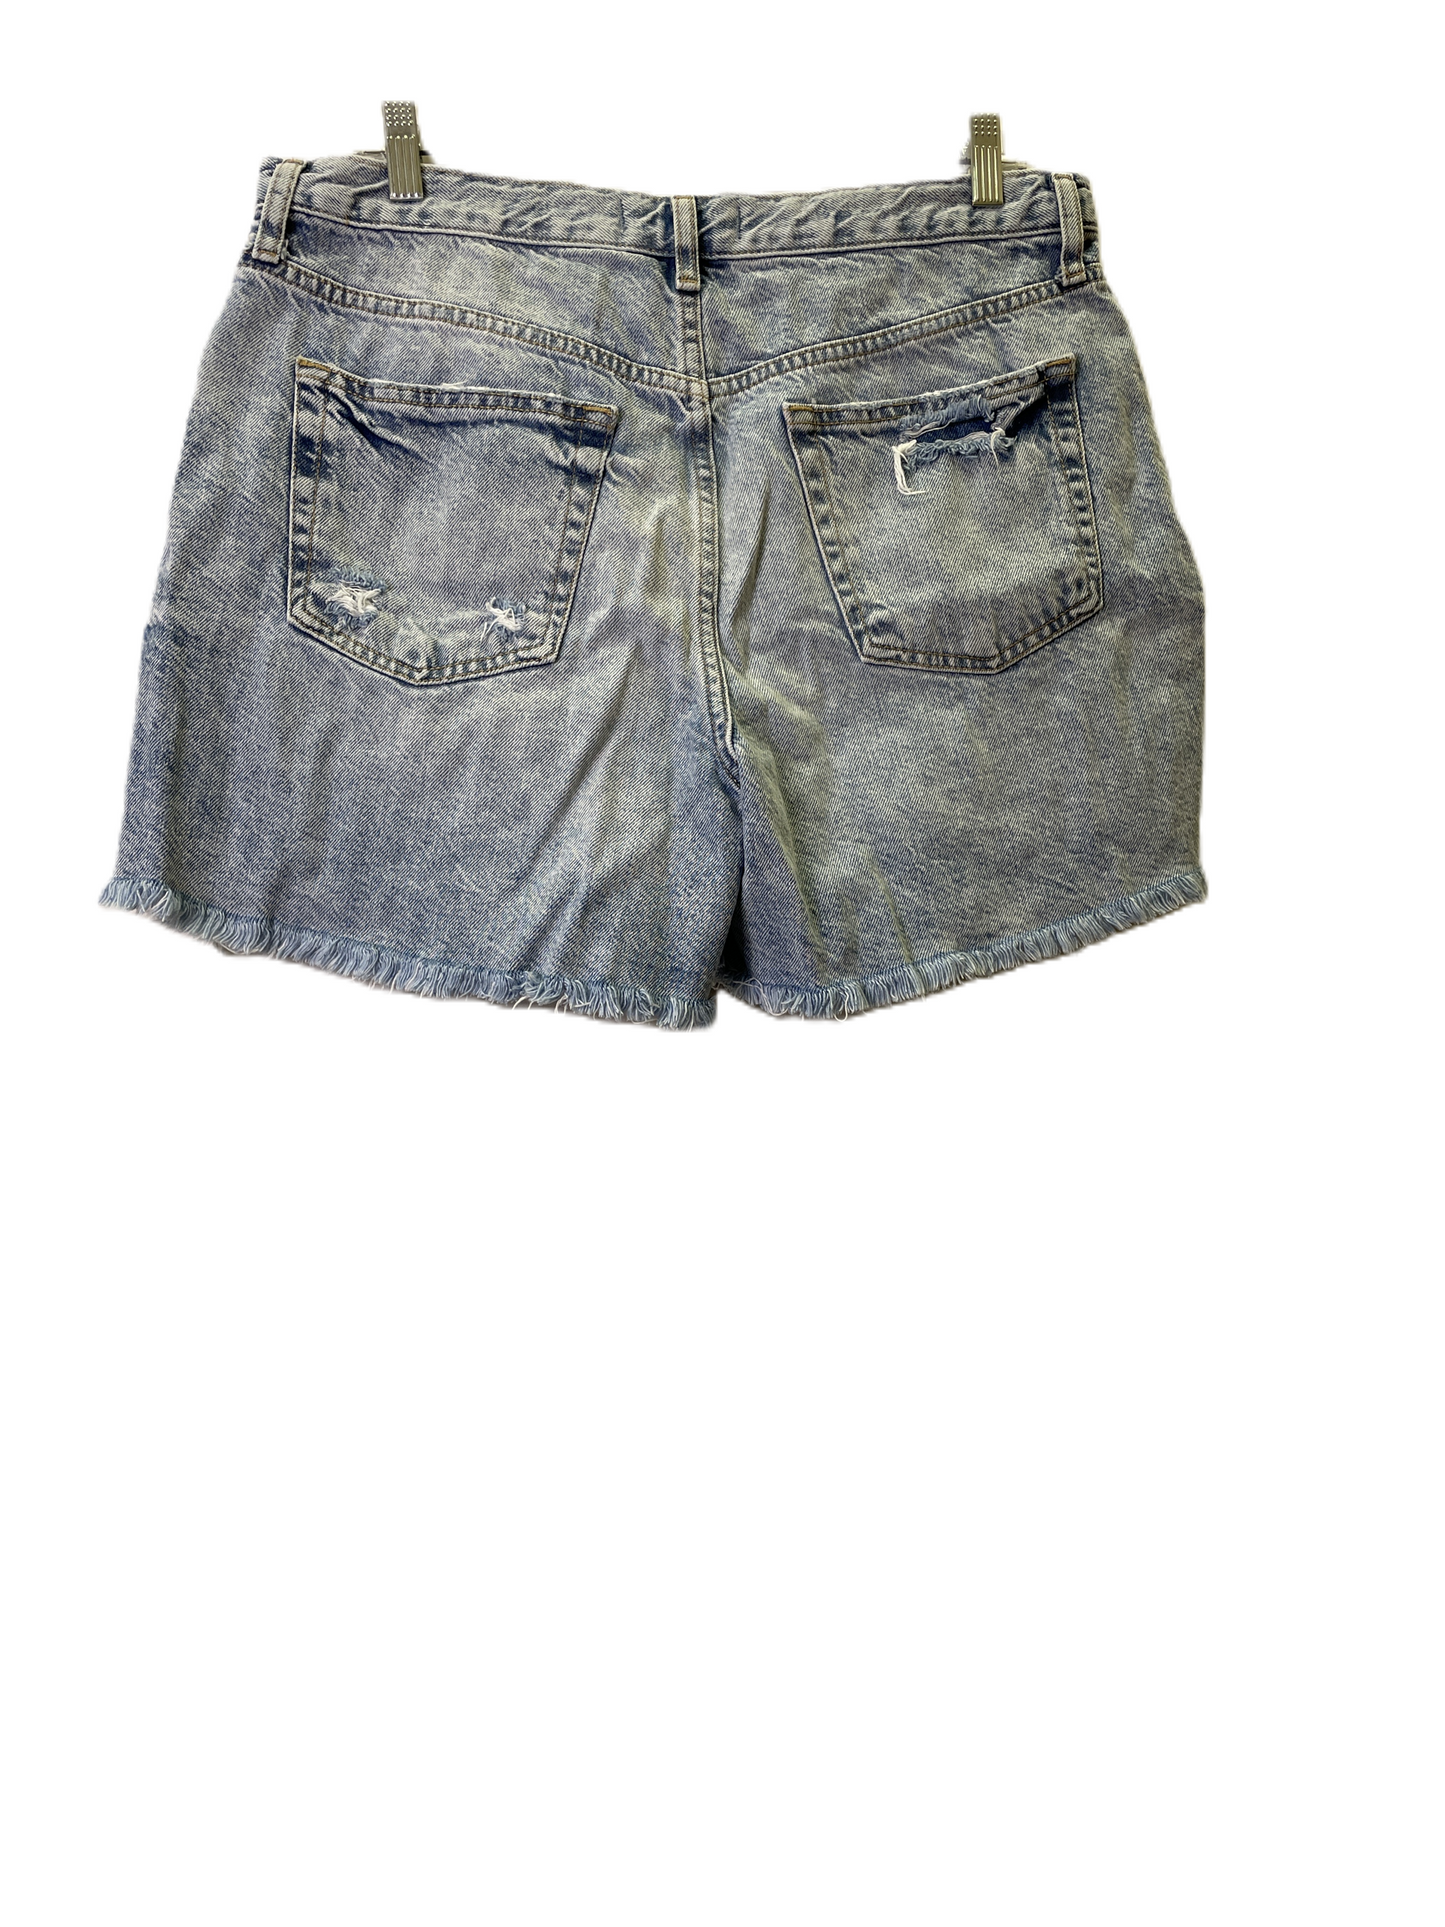 Blue Denim Shorts By We The Free, Size: 12